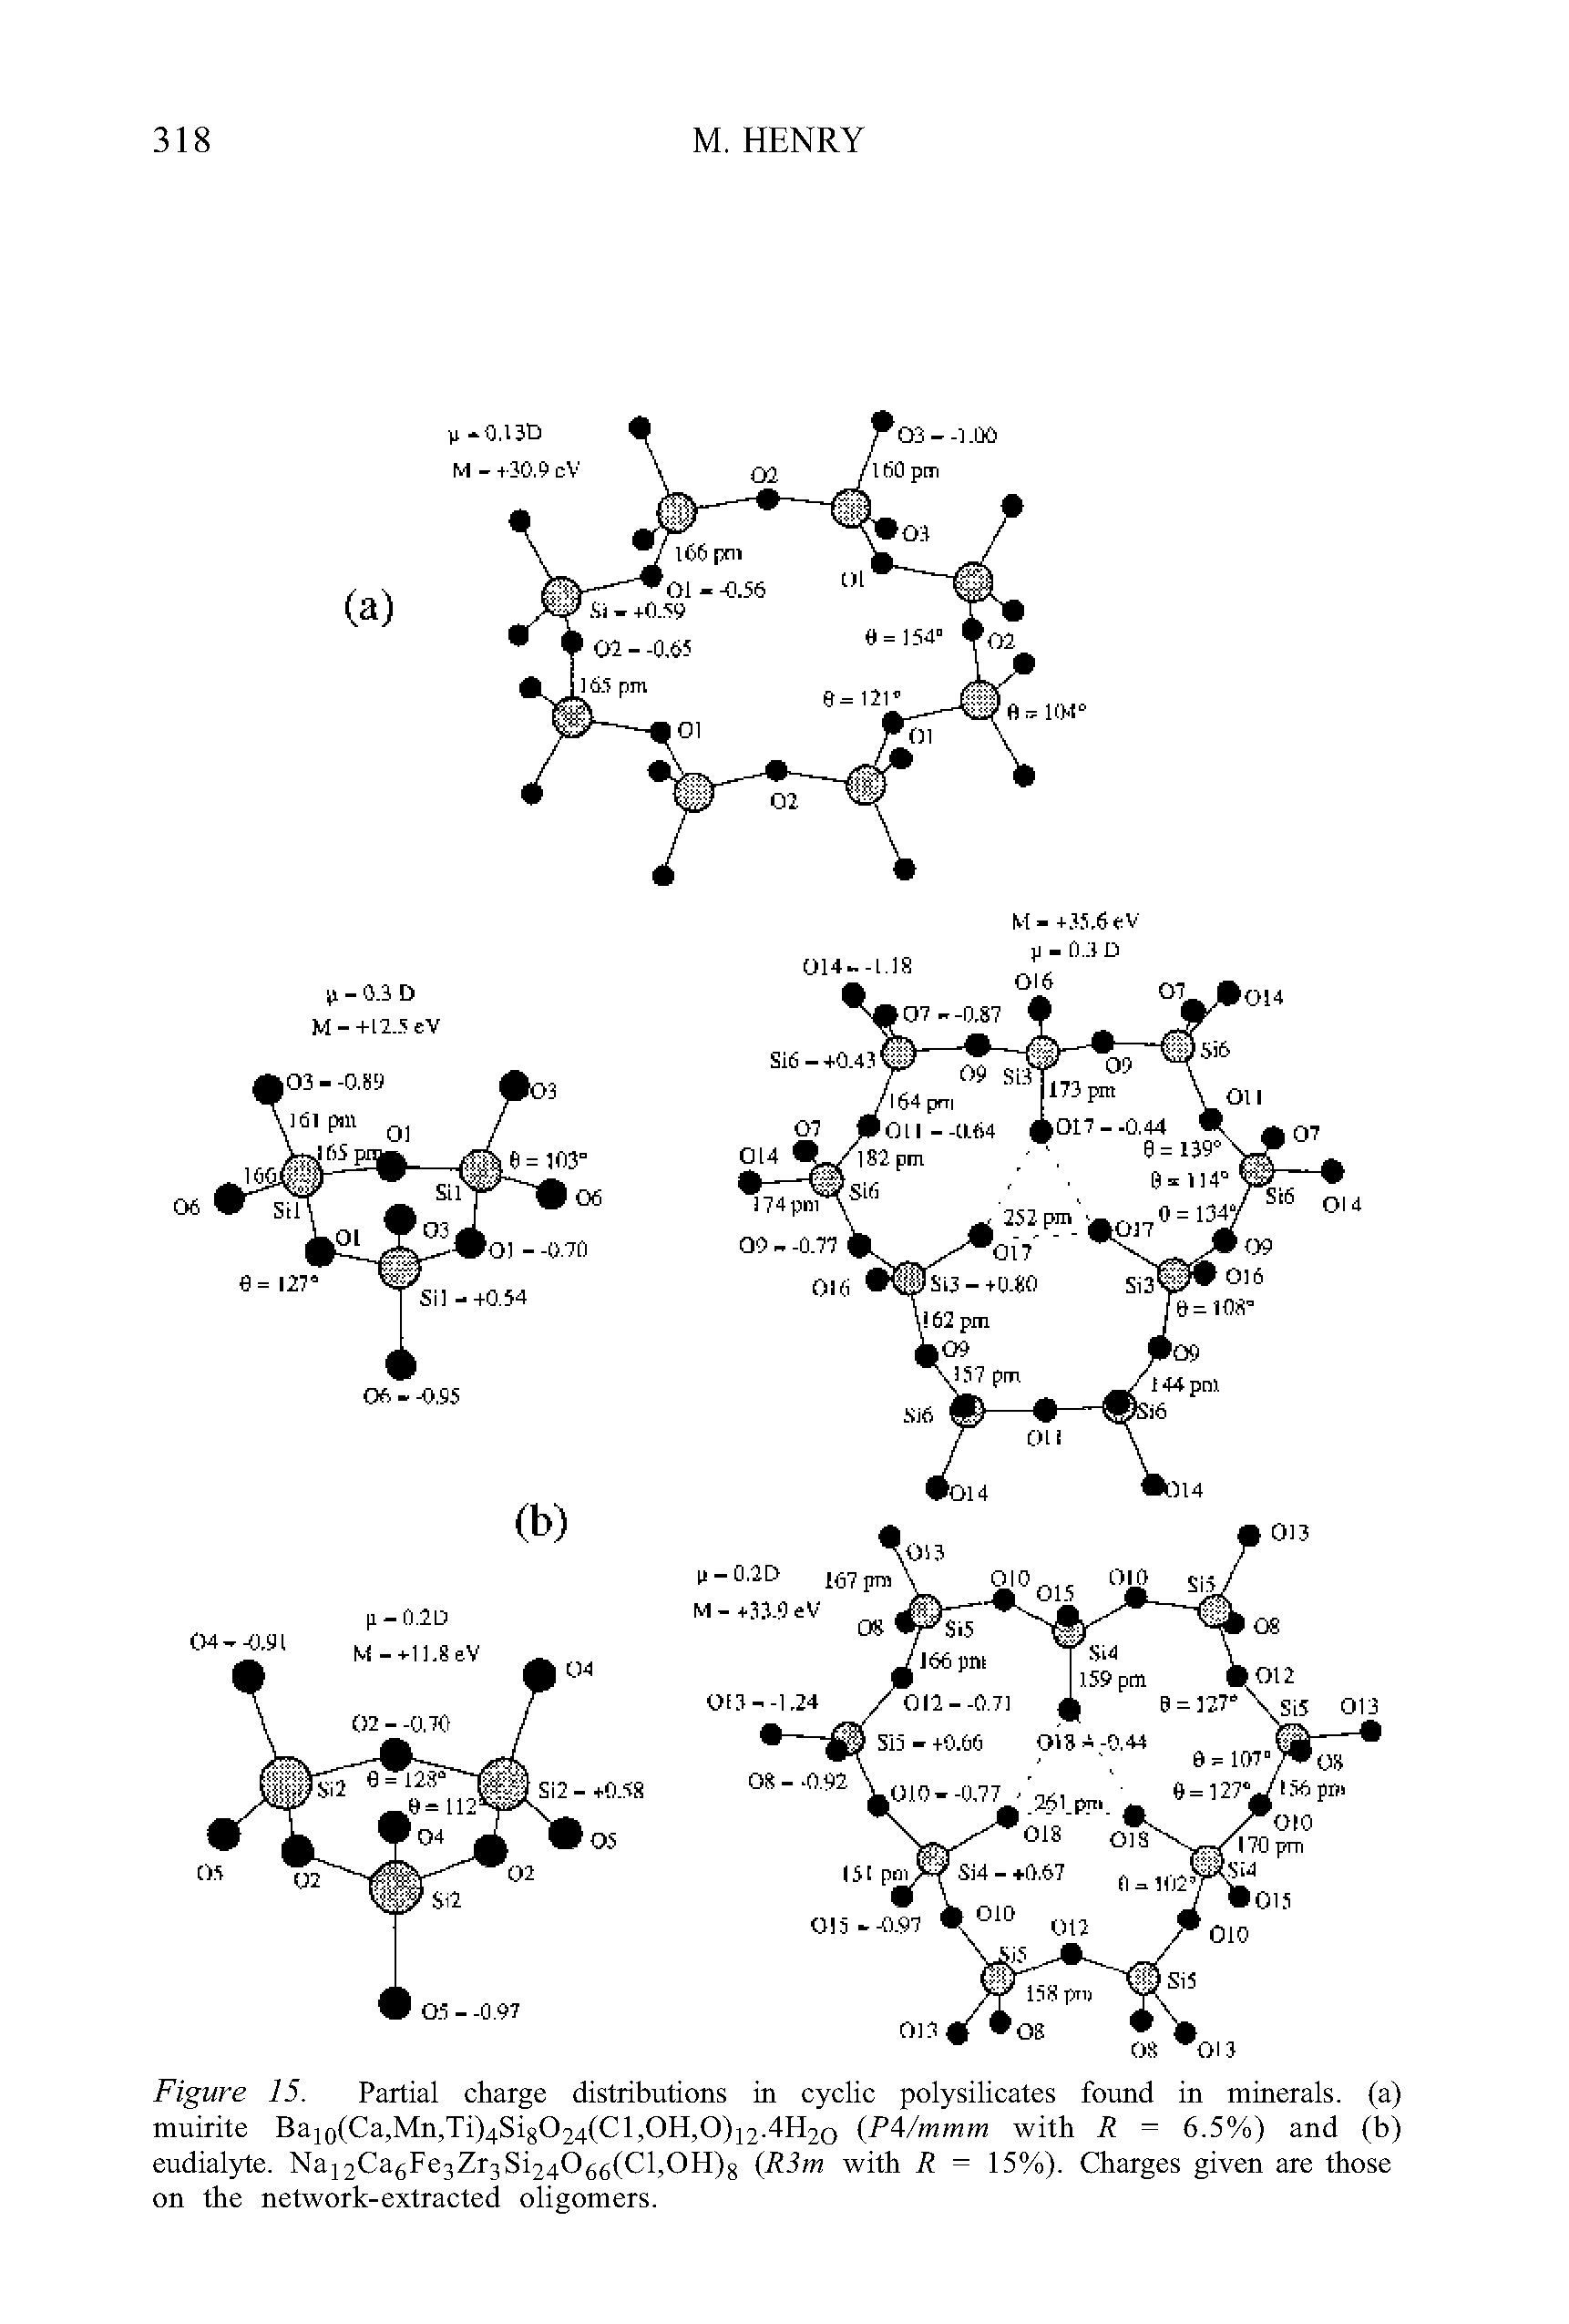 Figure 15. Partial charge distributions in cyclic polysilicates found in minerals, (a) muirite BajQ(Ca,Mn,Ti)4Sig024(Cl,OH,0)i2.4H2o (P /mmm with R = 6.5%) and (b) eudialyte. Naj2CagFe3Zr3Si2406g(Cl,0H)g (Rim with R = 15%). Charges given are those on the network-extraeted oligomers.